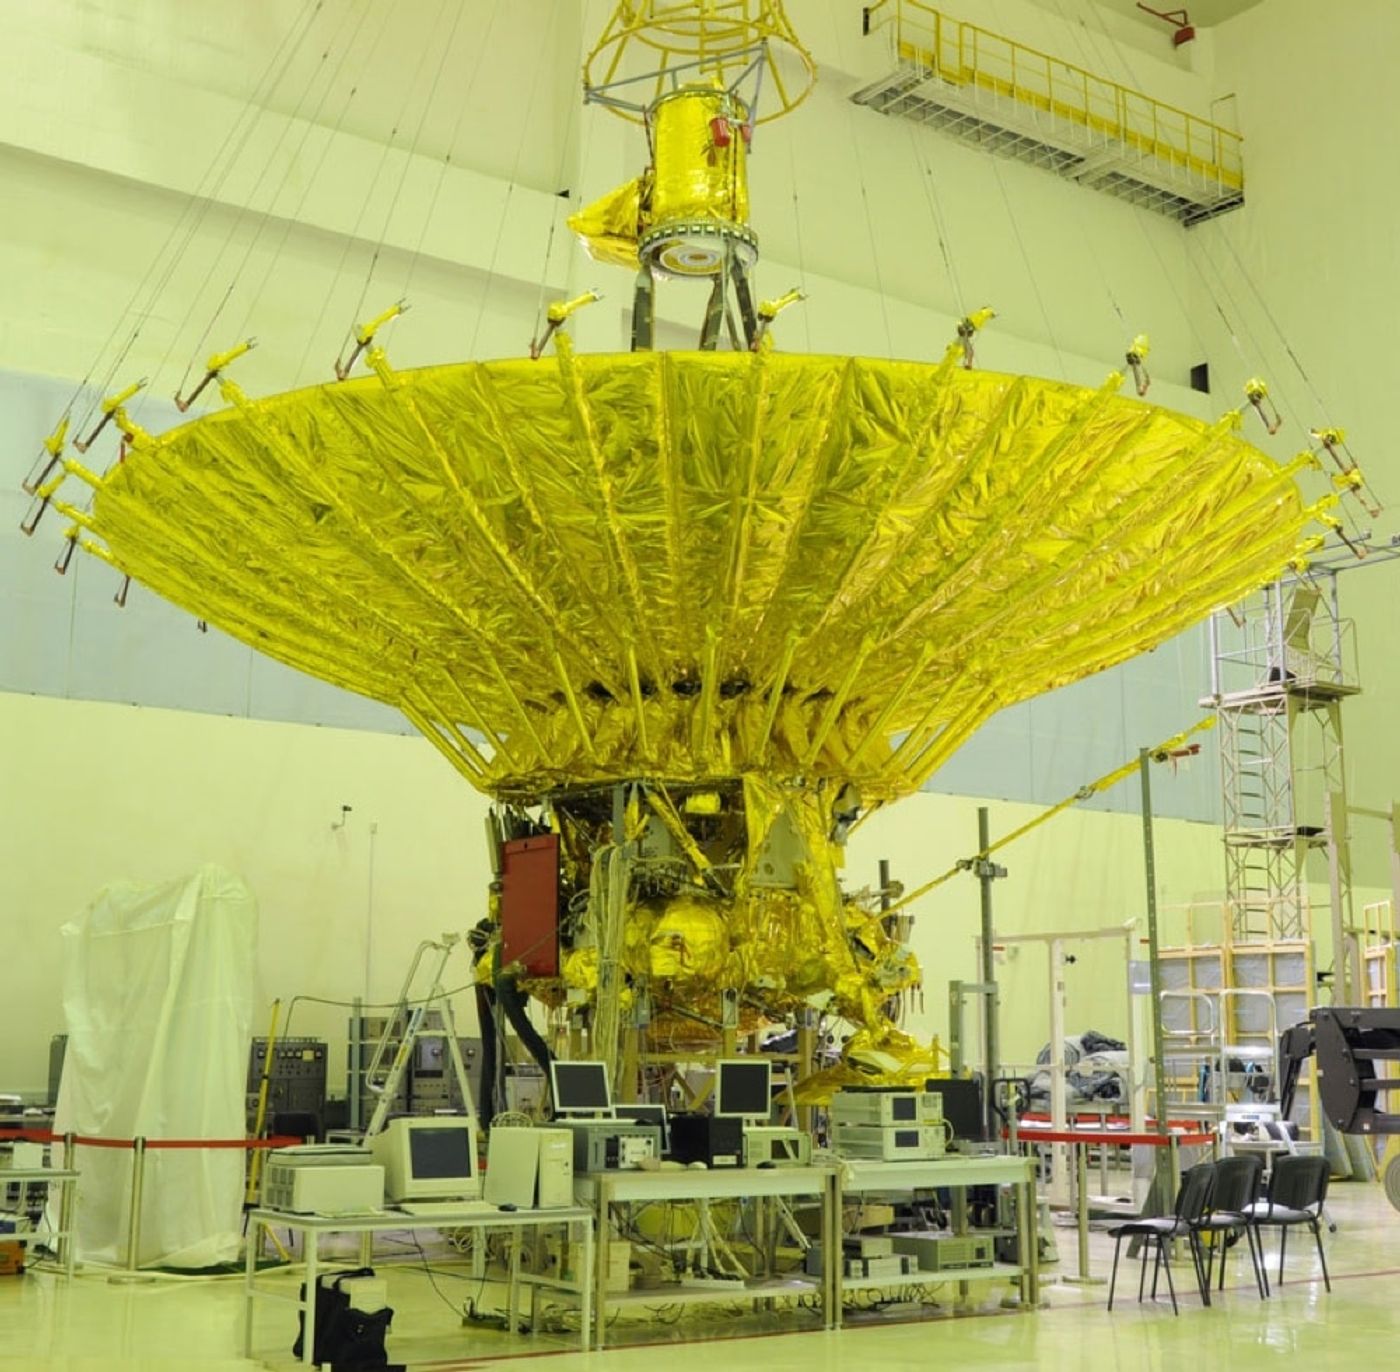 Spektr-R in the lab before it was launched in 2011.